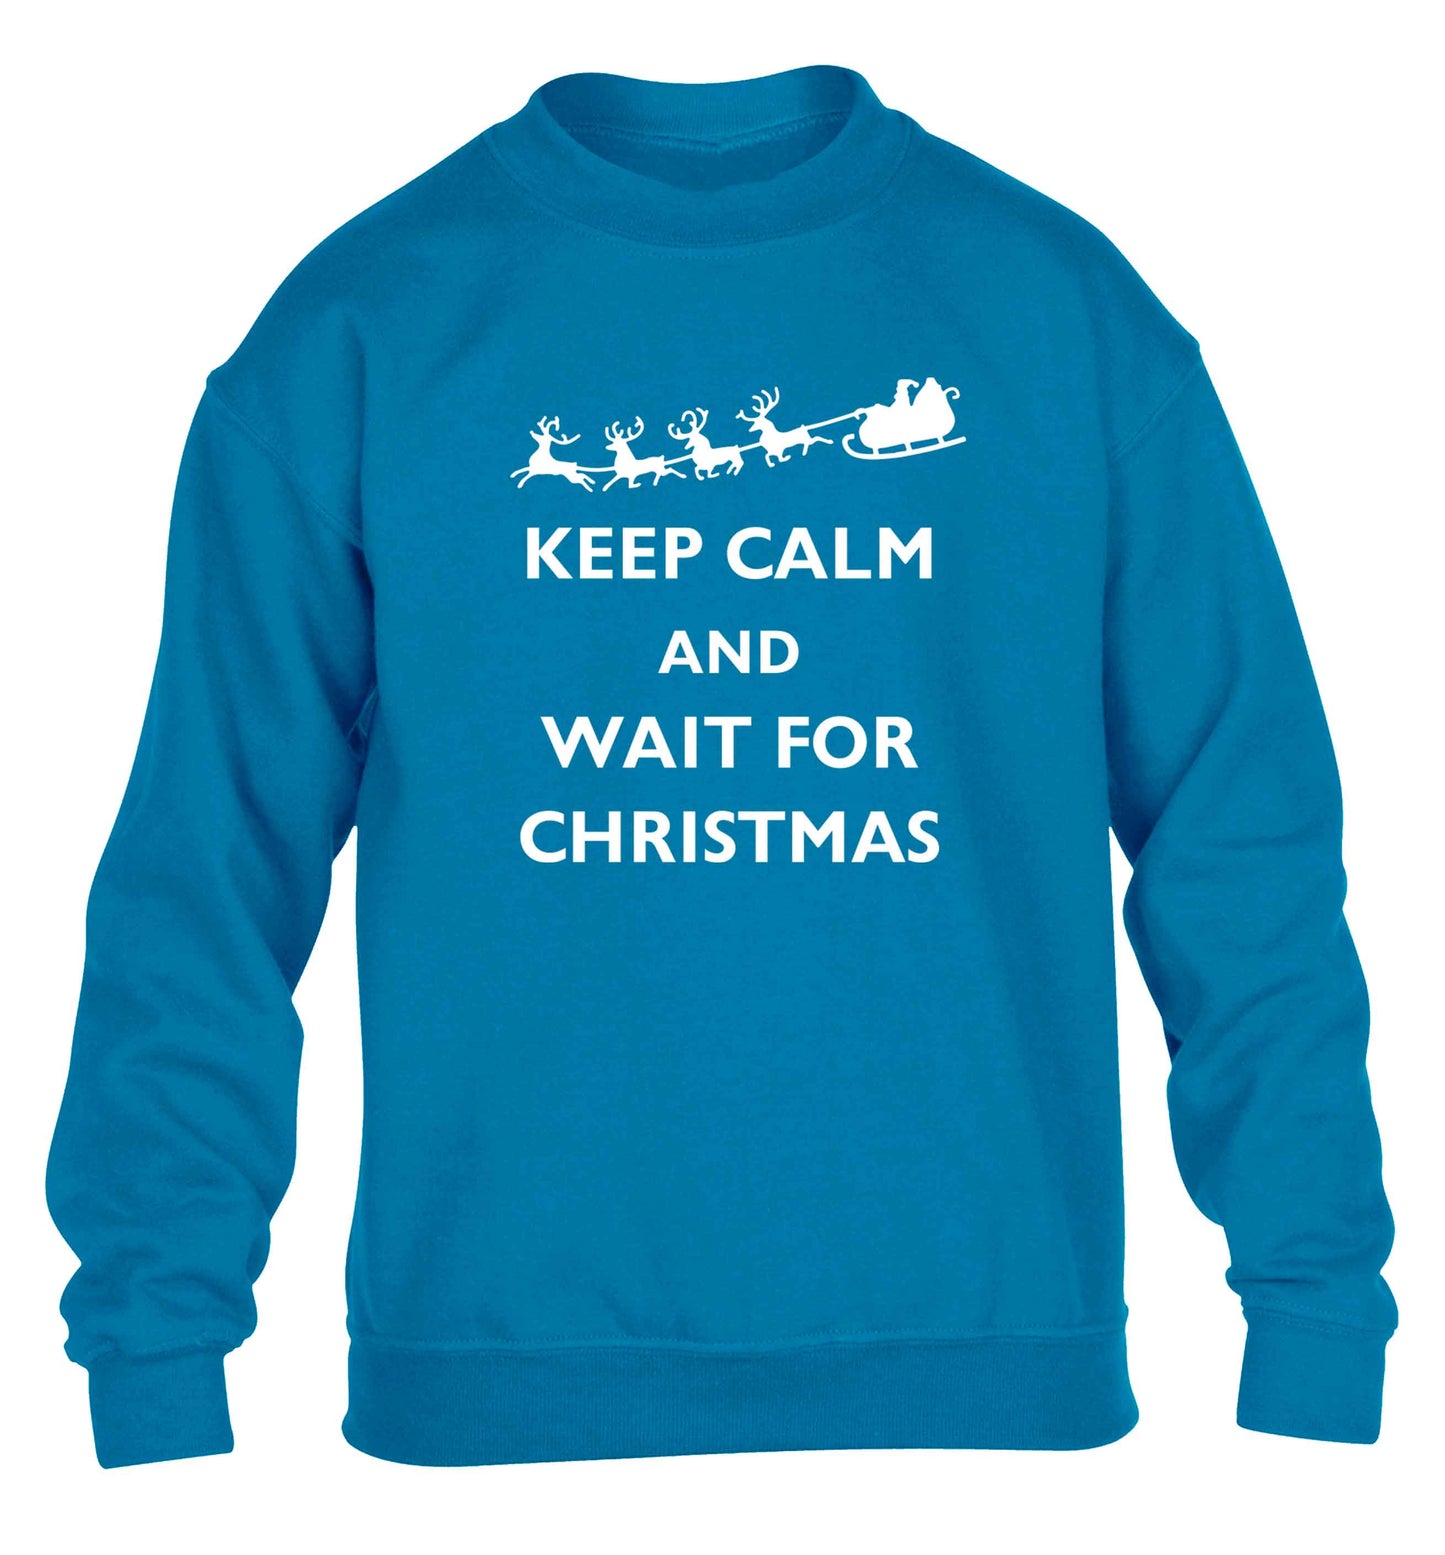 Keep calm and wait for Christmas children's blue sweater 12-13 Years